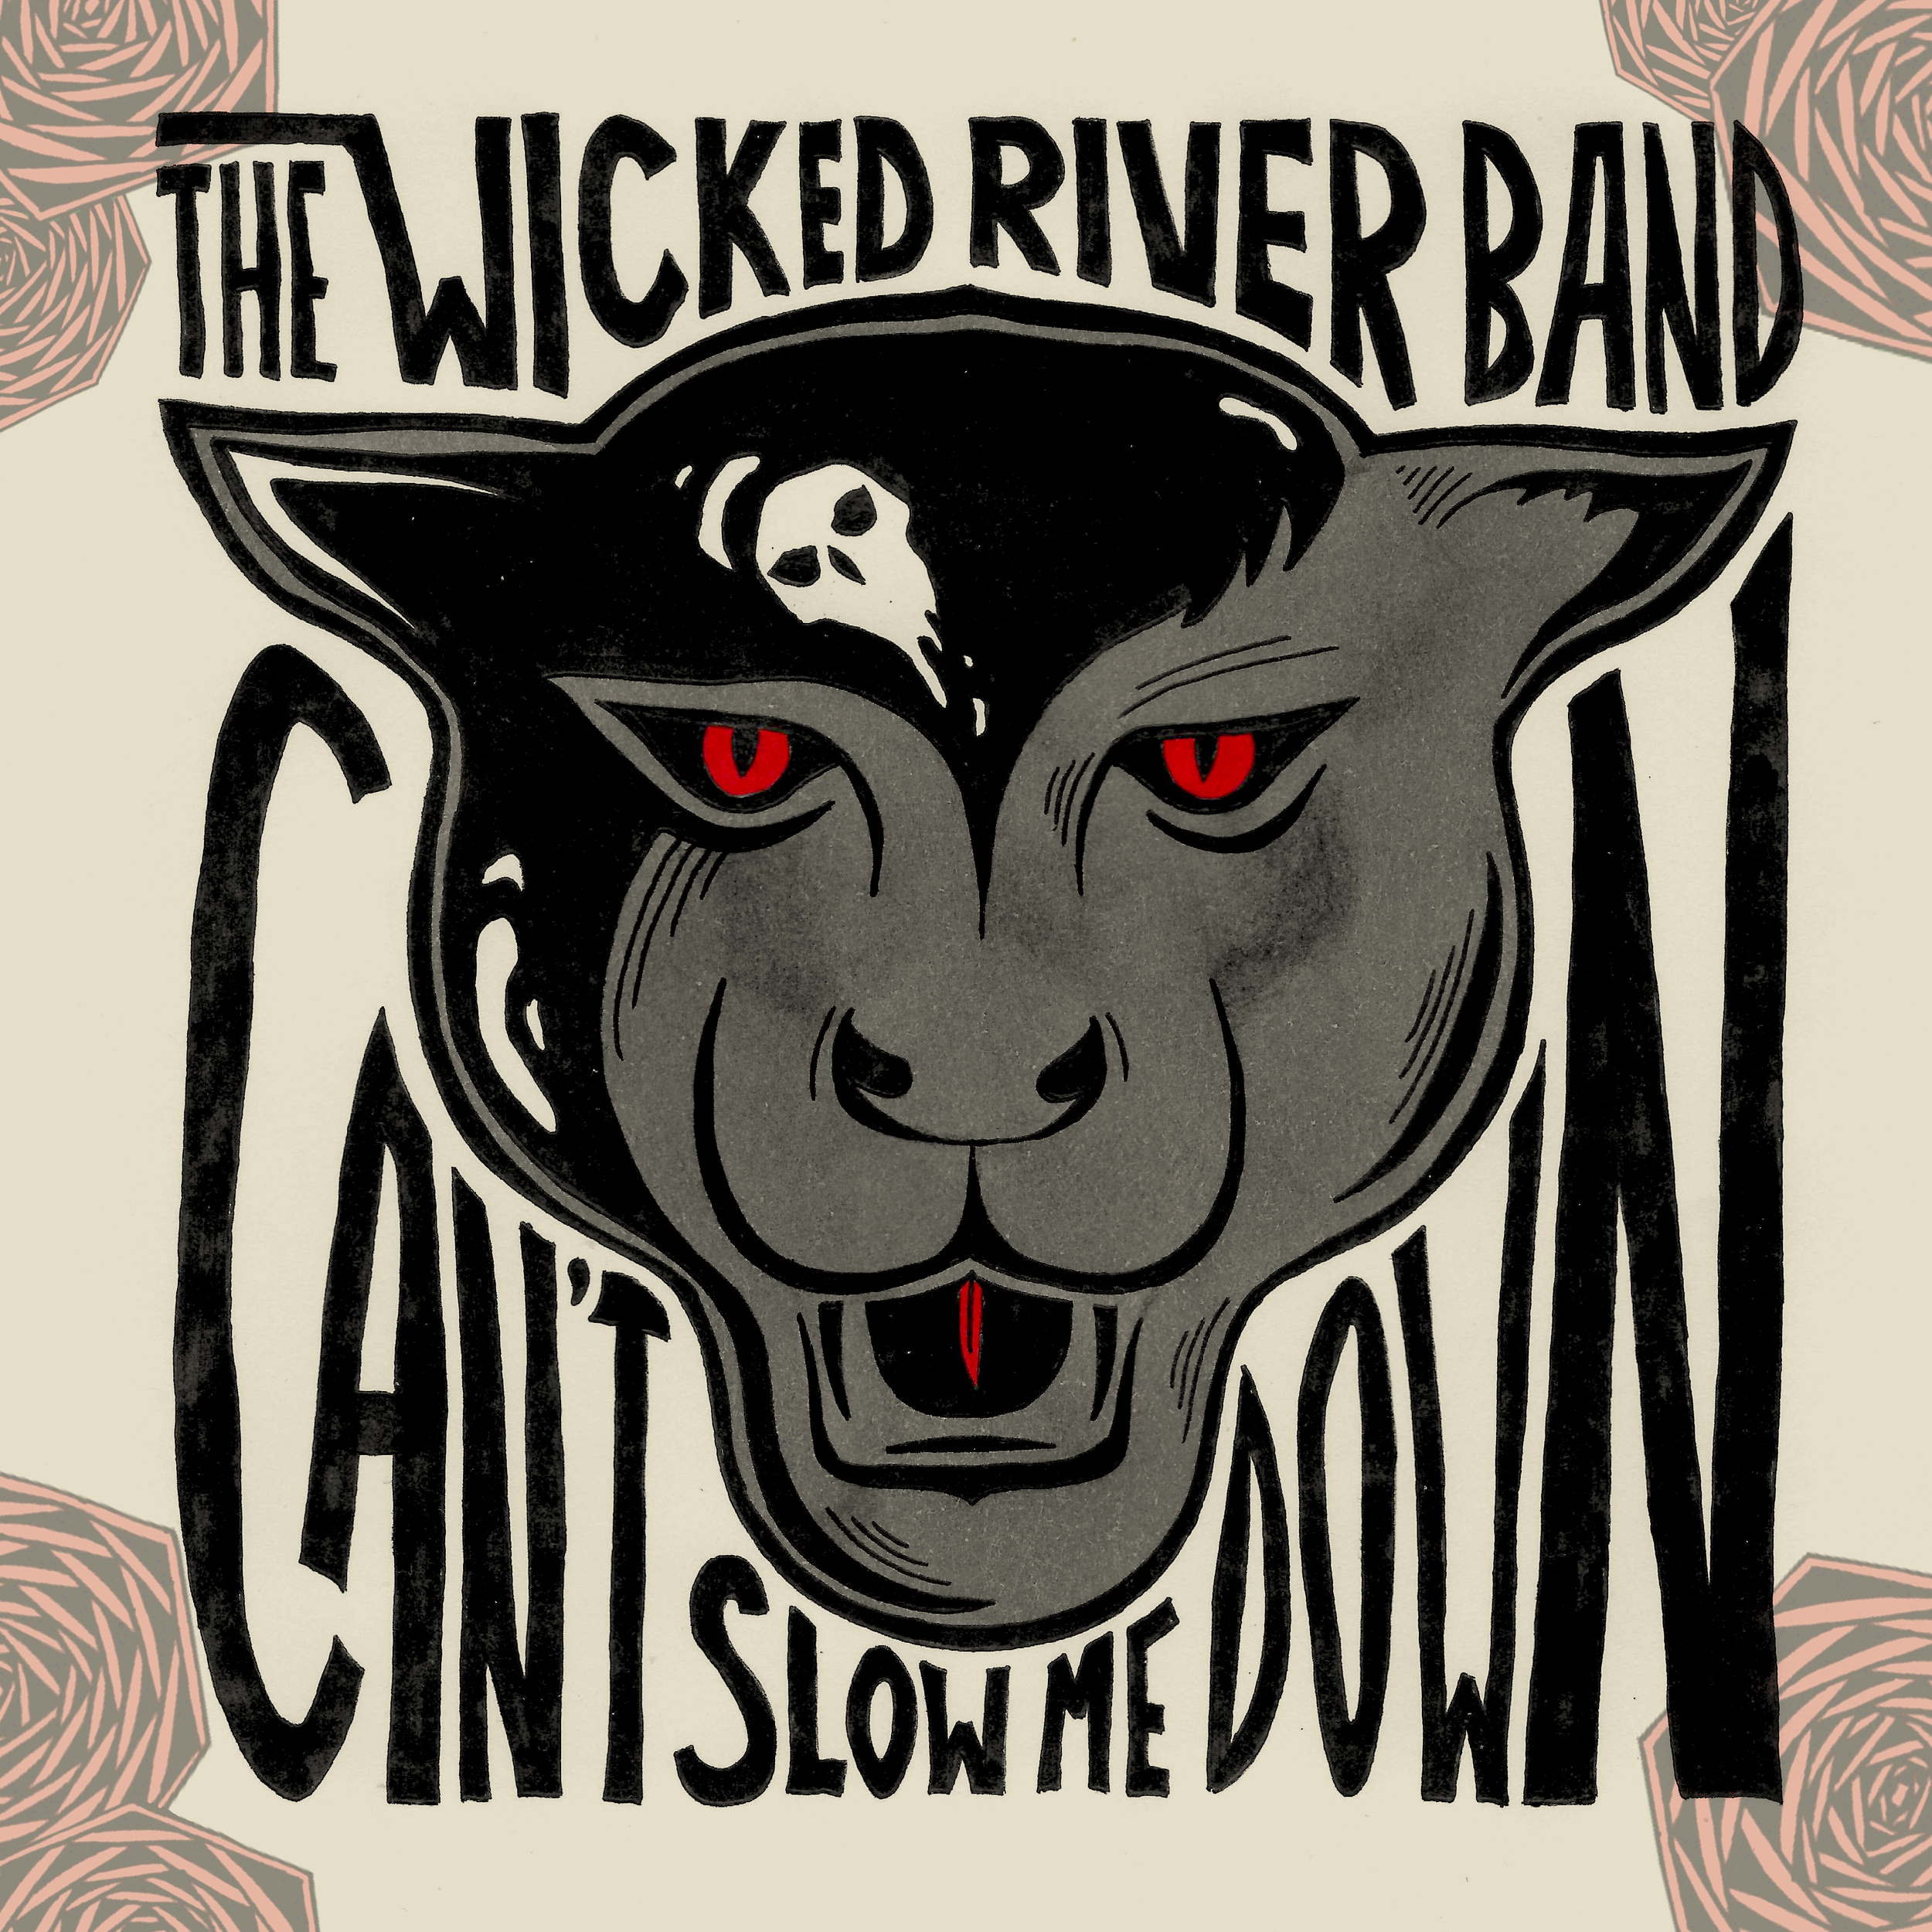 The Wicked River Band "Can't Slow Me Down" Single Cover